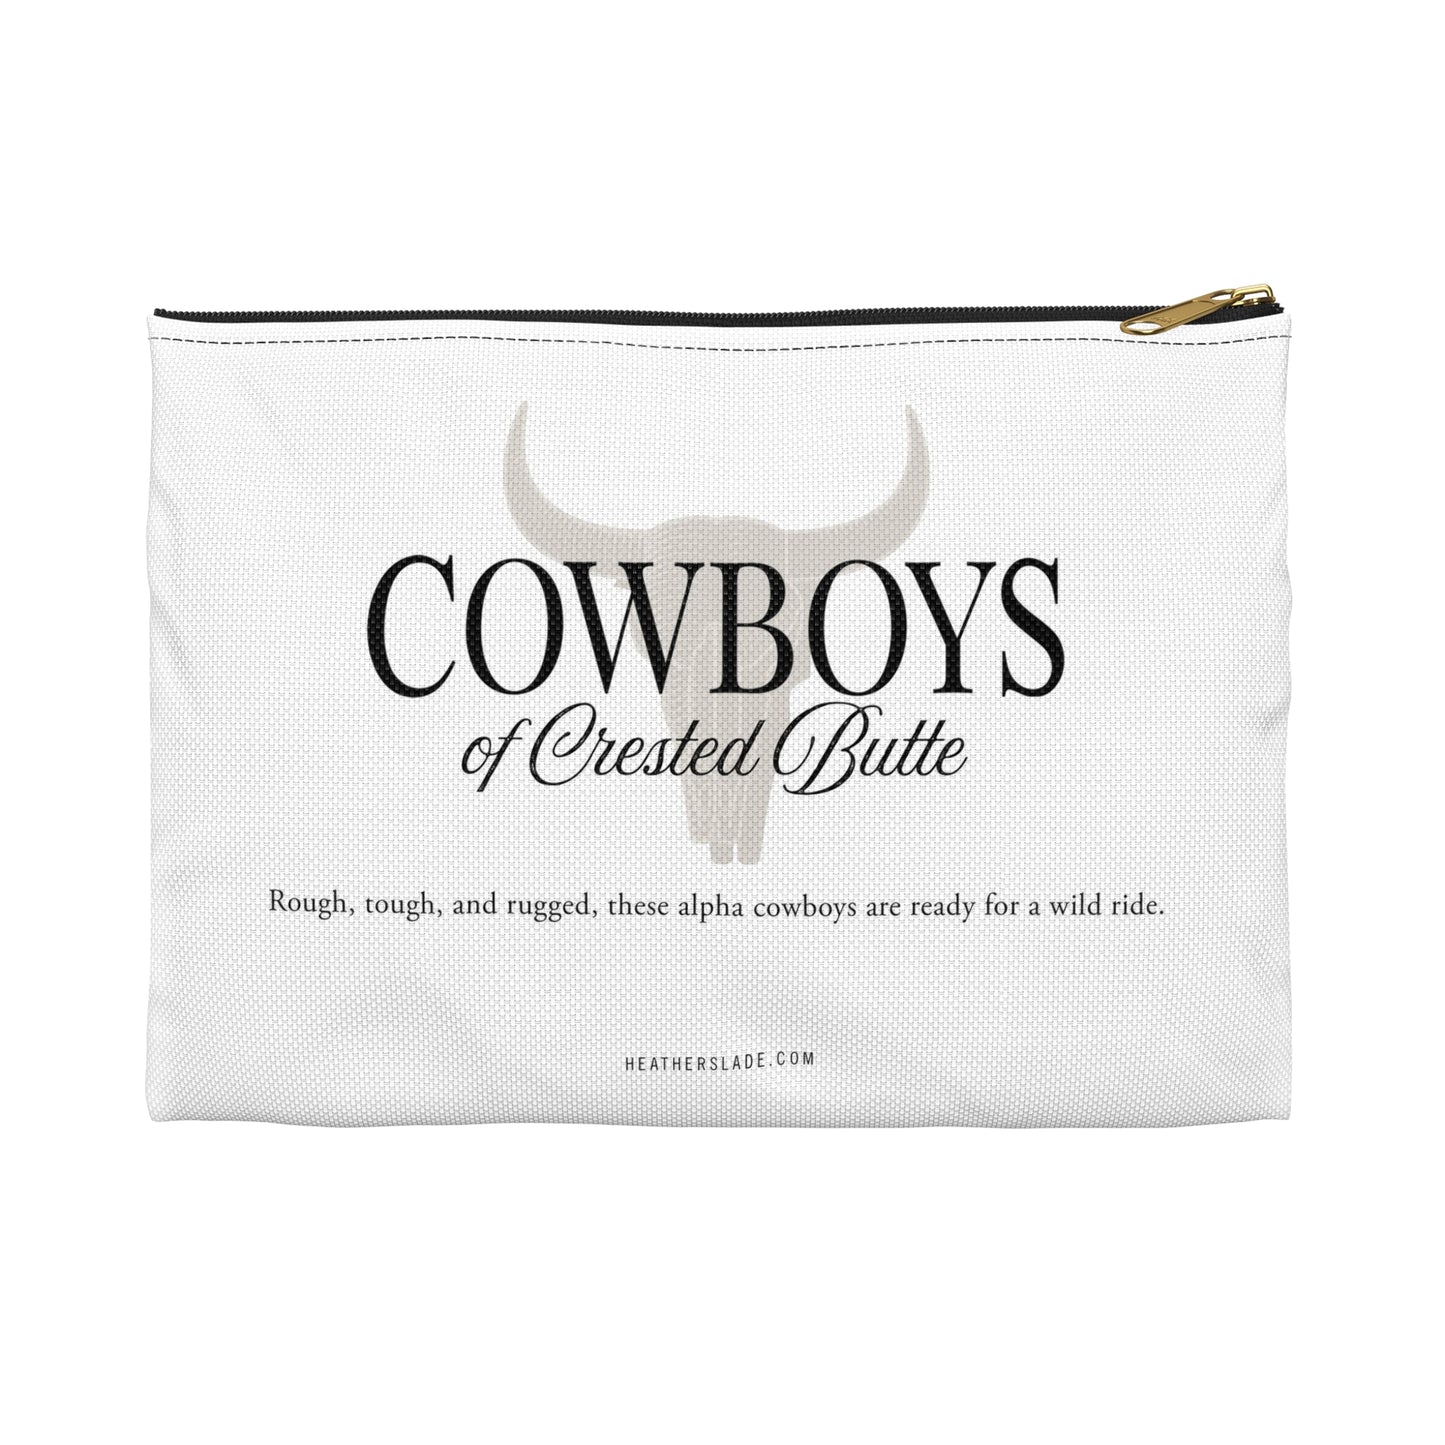 Cowboys of Crested Butte Accessory Pouch